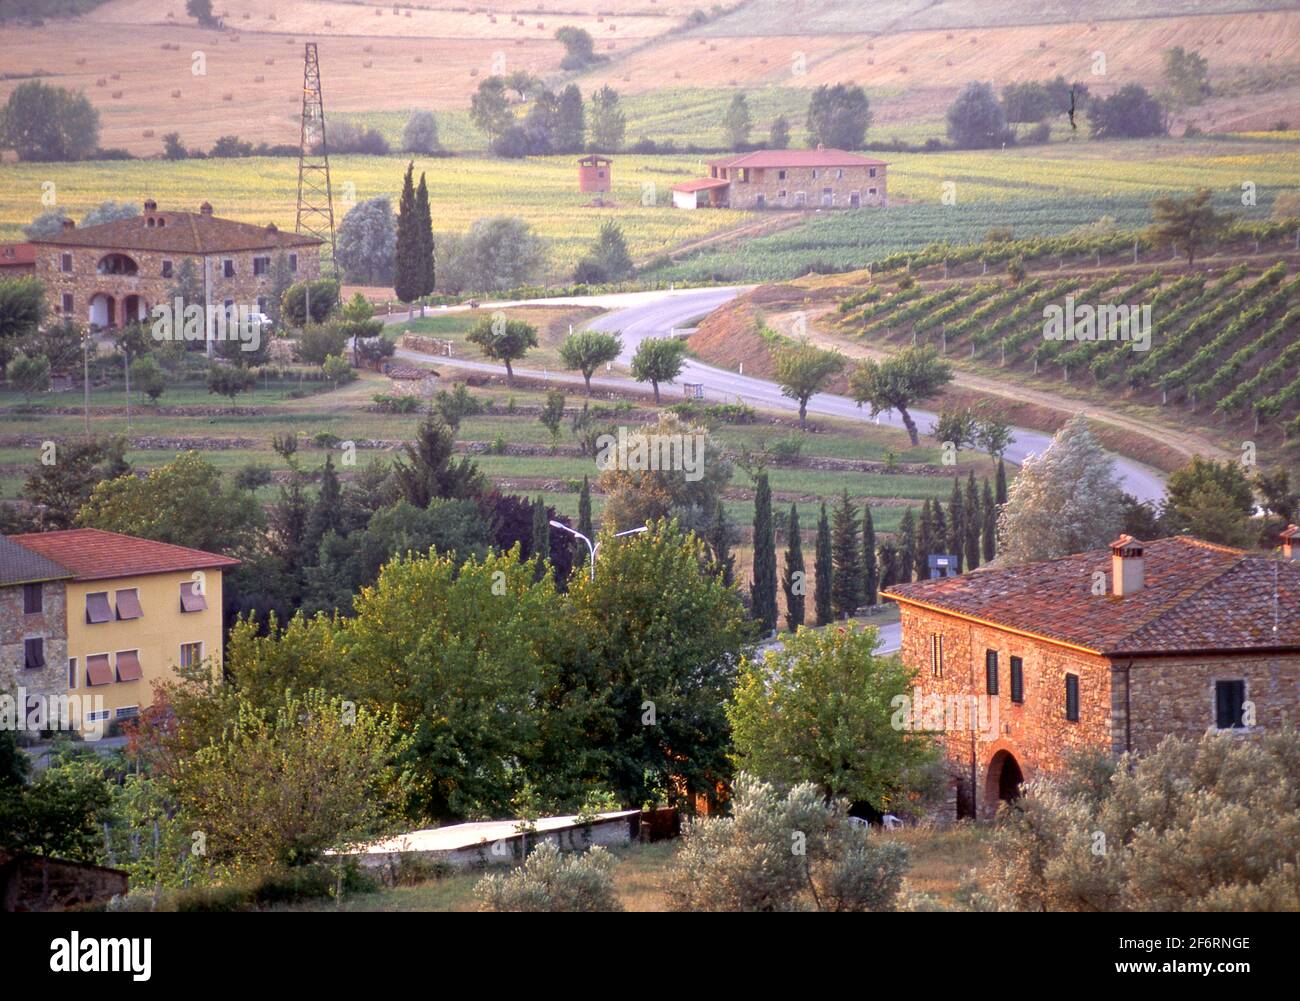 Farmhouses and fields in scenic landscape in the Valdarno region of Tuscany, Italy Stock Photo